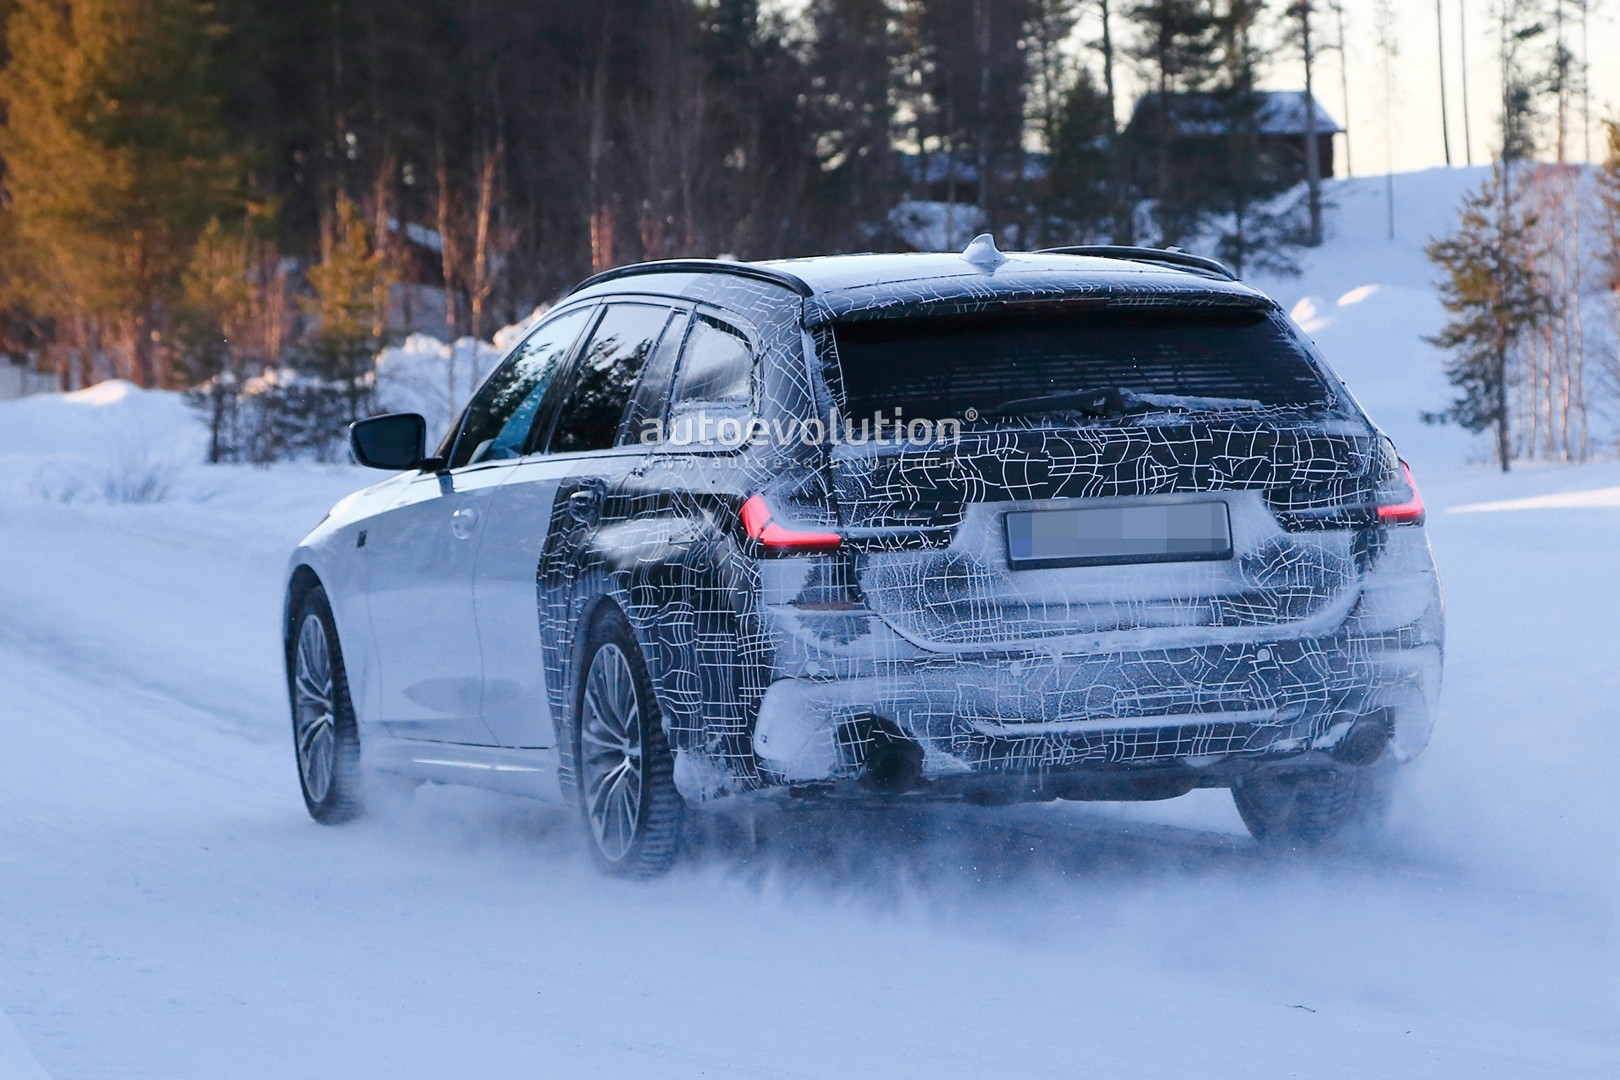 2020-bmw-3-series-touring-spied-winter-testing-with-m-sport-package_6.jpg